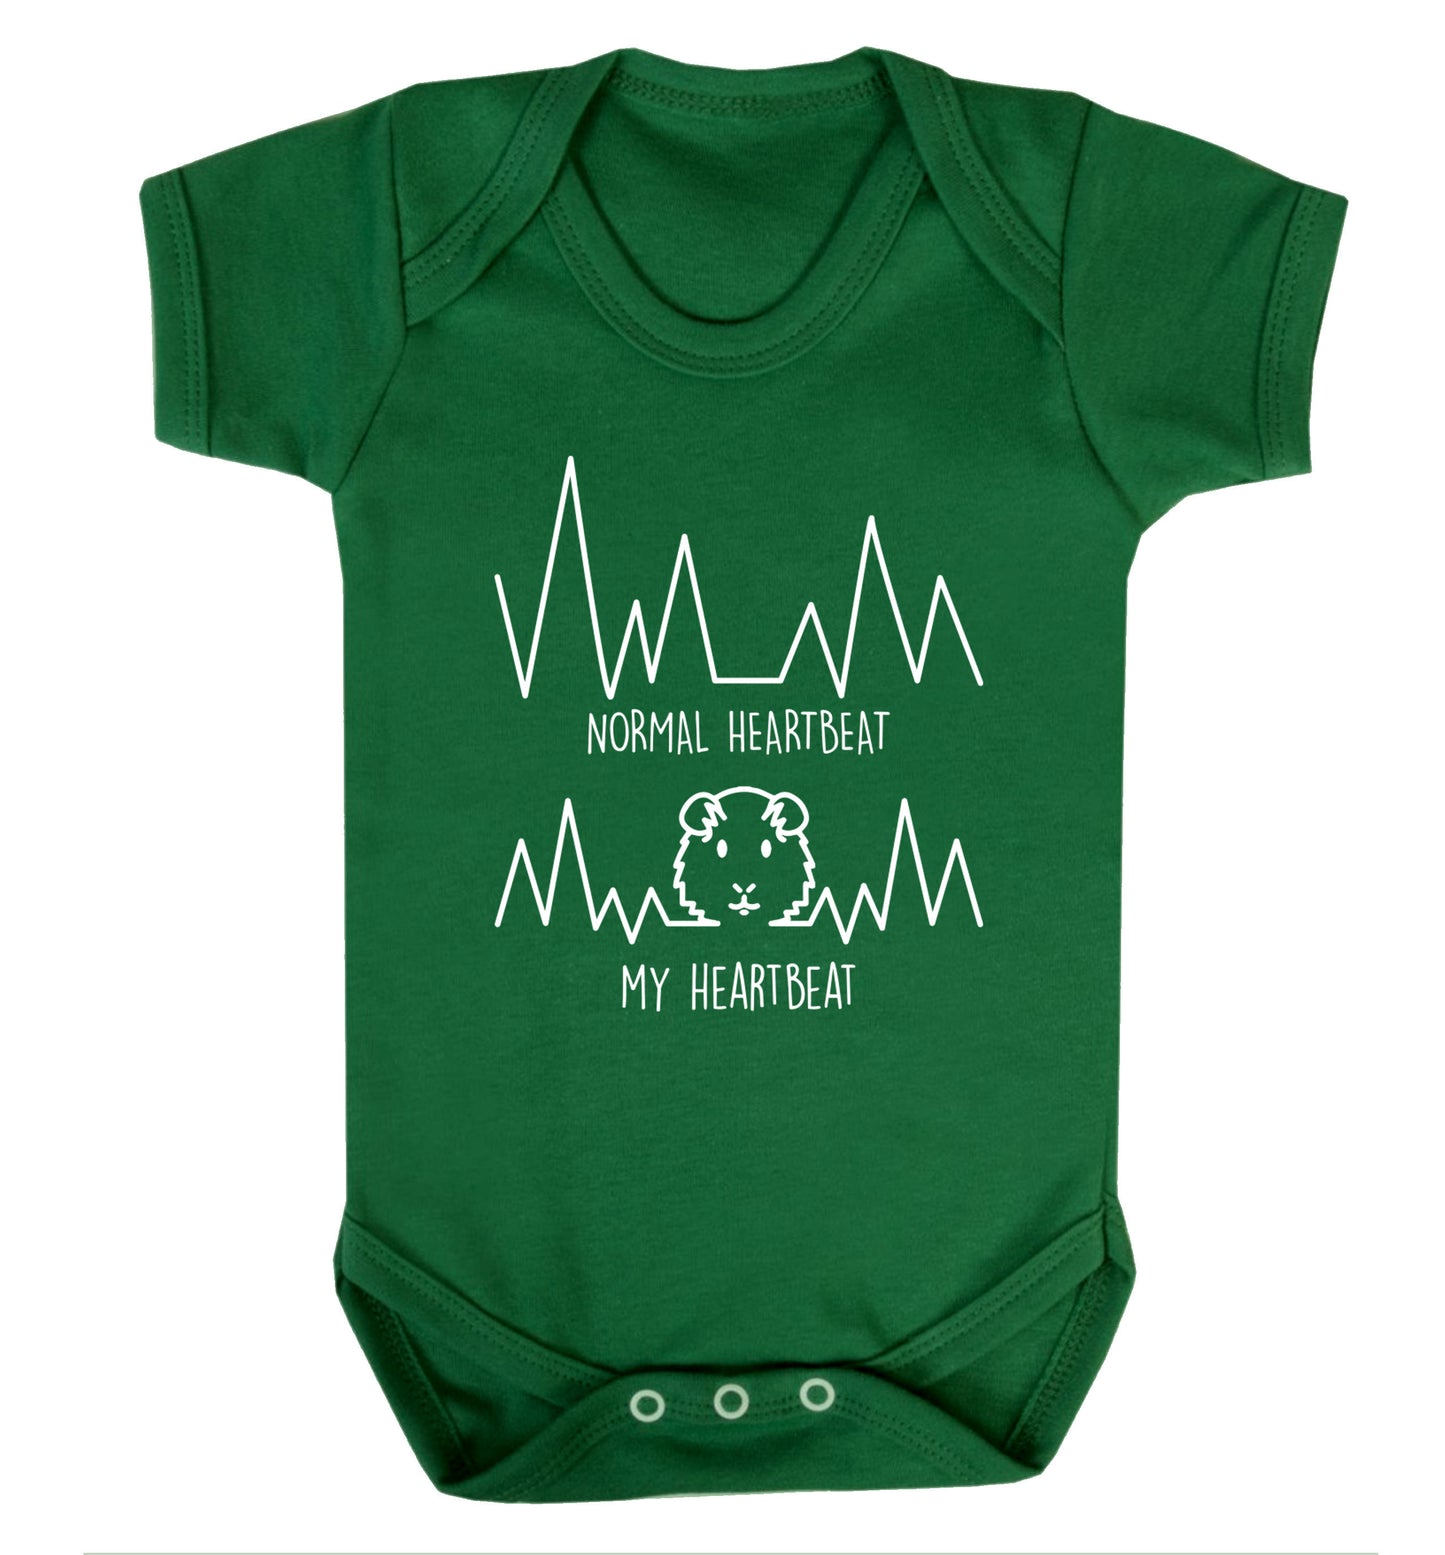 Normal heartbeat vs my heartbeat guinea pig lover Baby Vest green 18-24 months